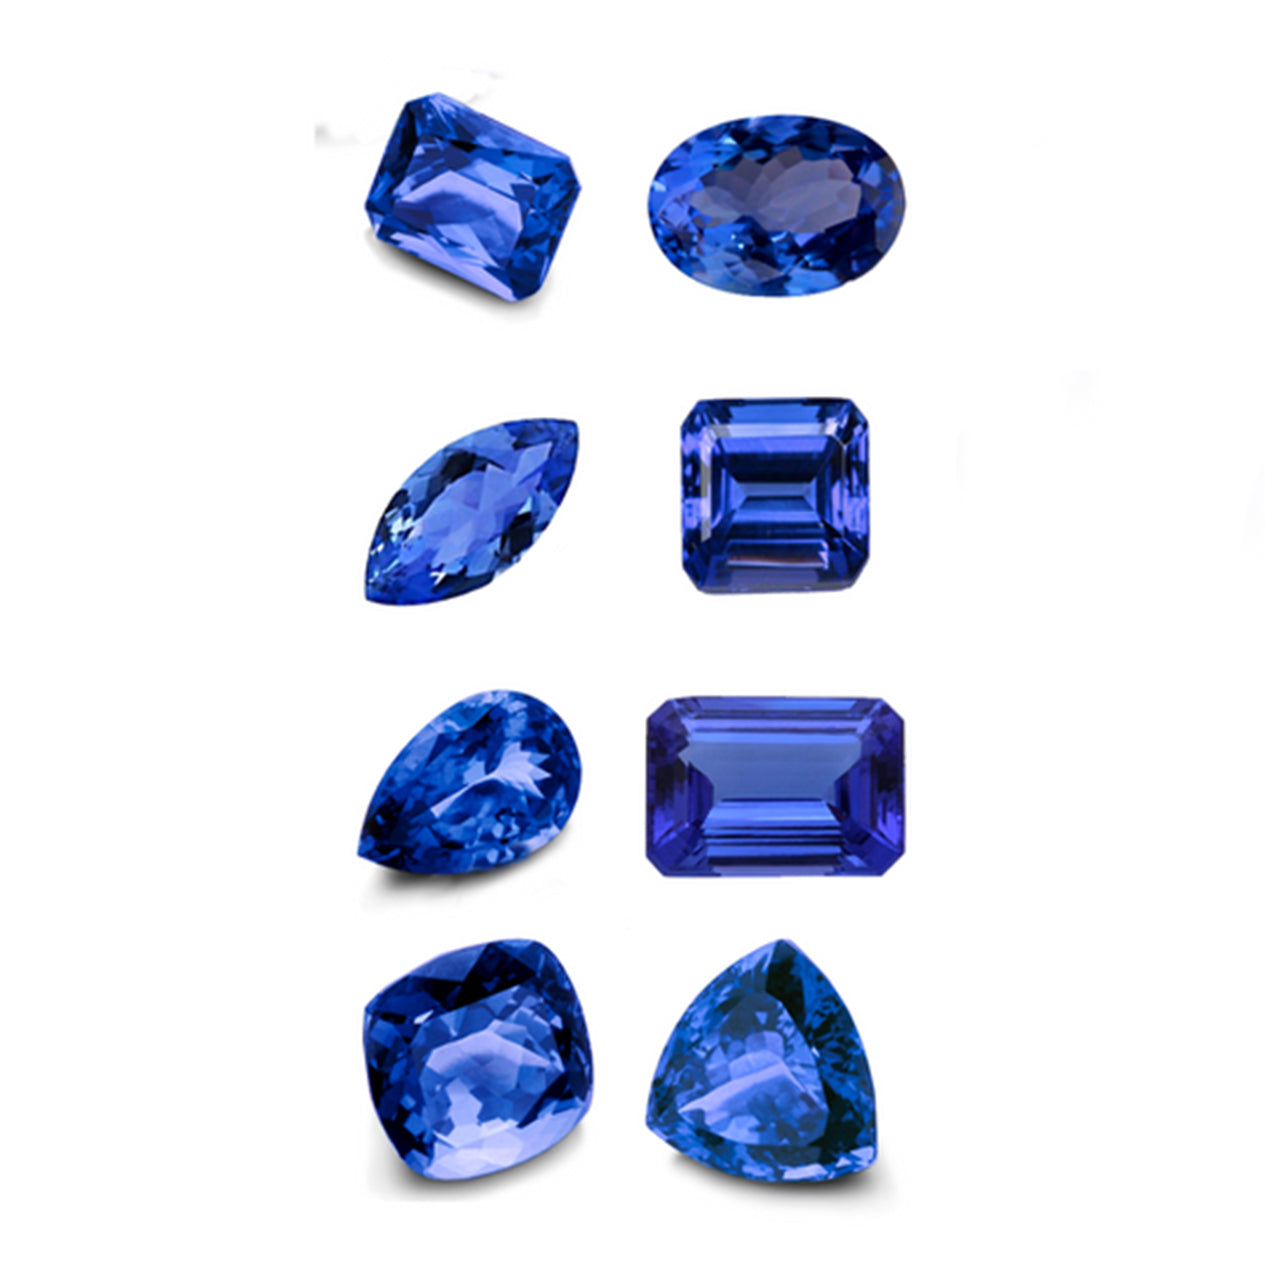 Various types of Tanzanite shapes and cuts on a white background